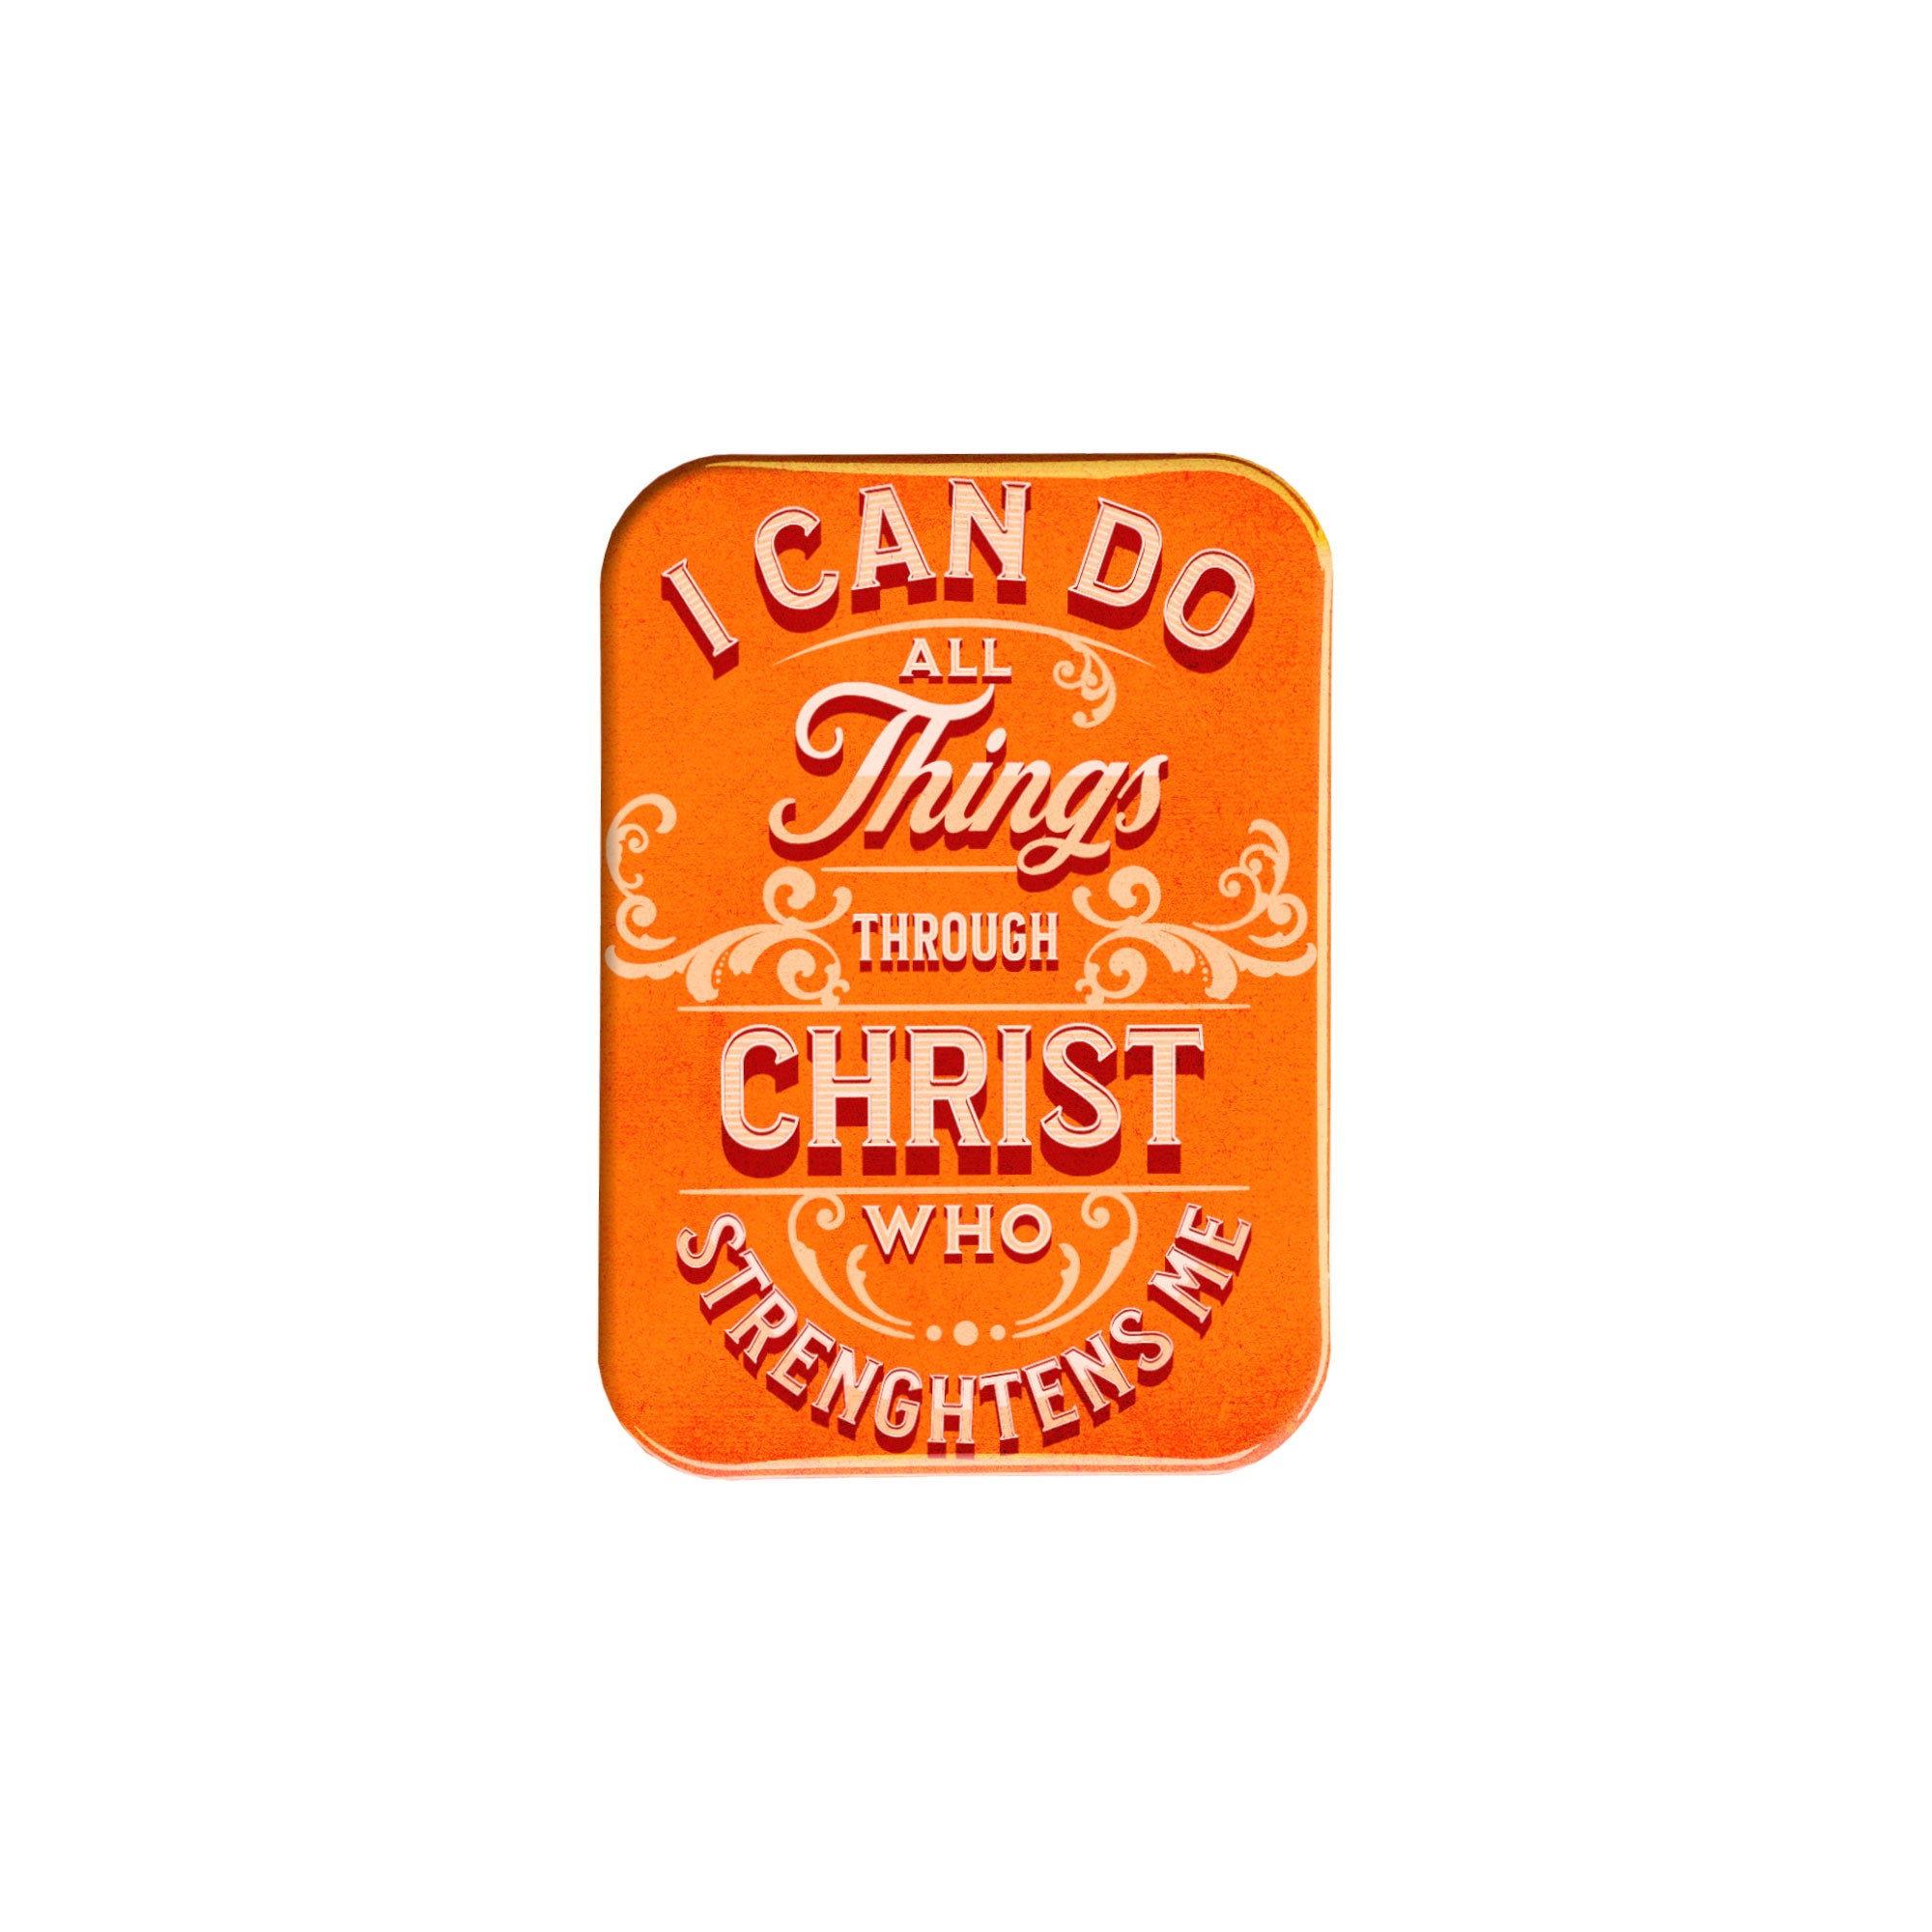 "All Things Through Christ" - 2.5" X 3.5" Rectangle Fridge Magnets